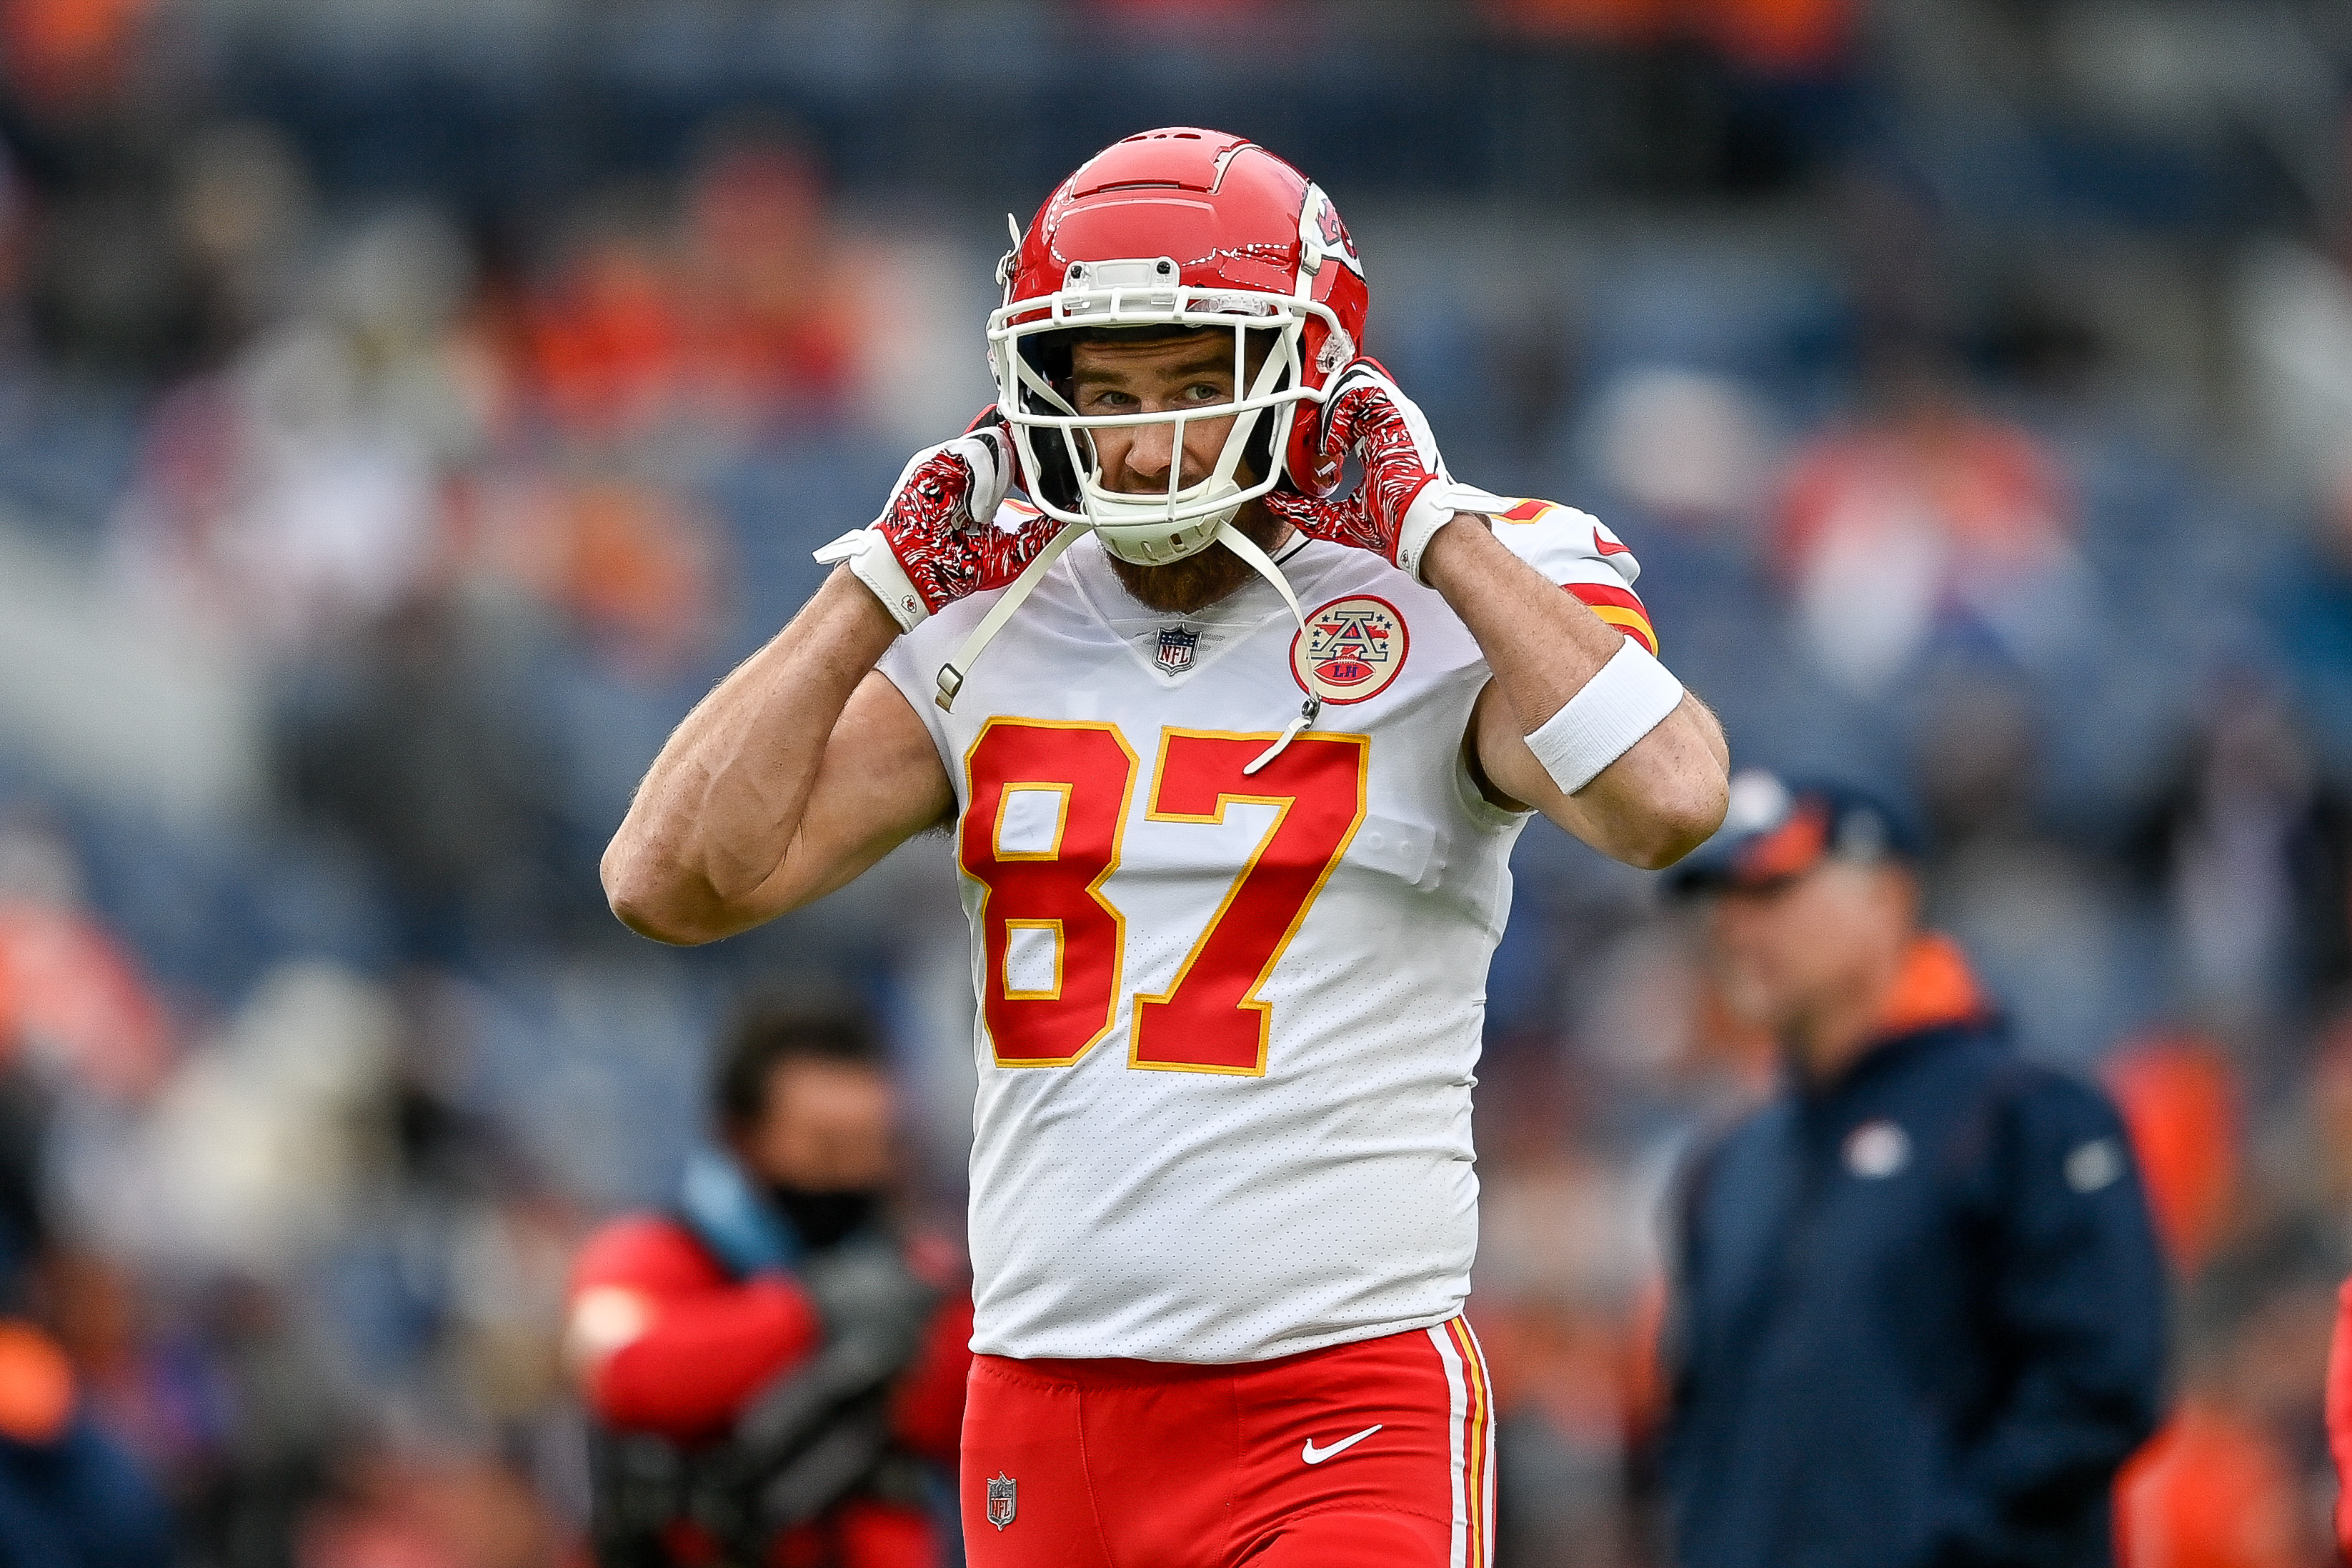 Travis Kelce #87 of the Kansas City Chiefs walks on the field before a game against the Denver Broncos at Empower Field at Mile High on January 8, 2022 in Denver, Colorado.